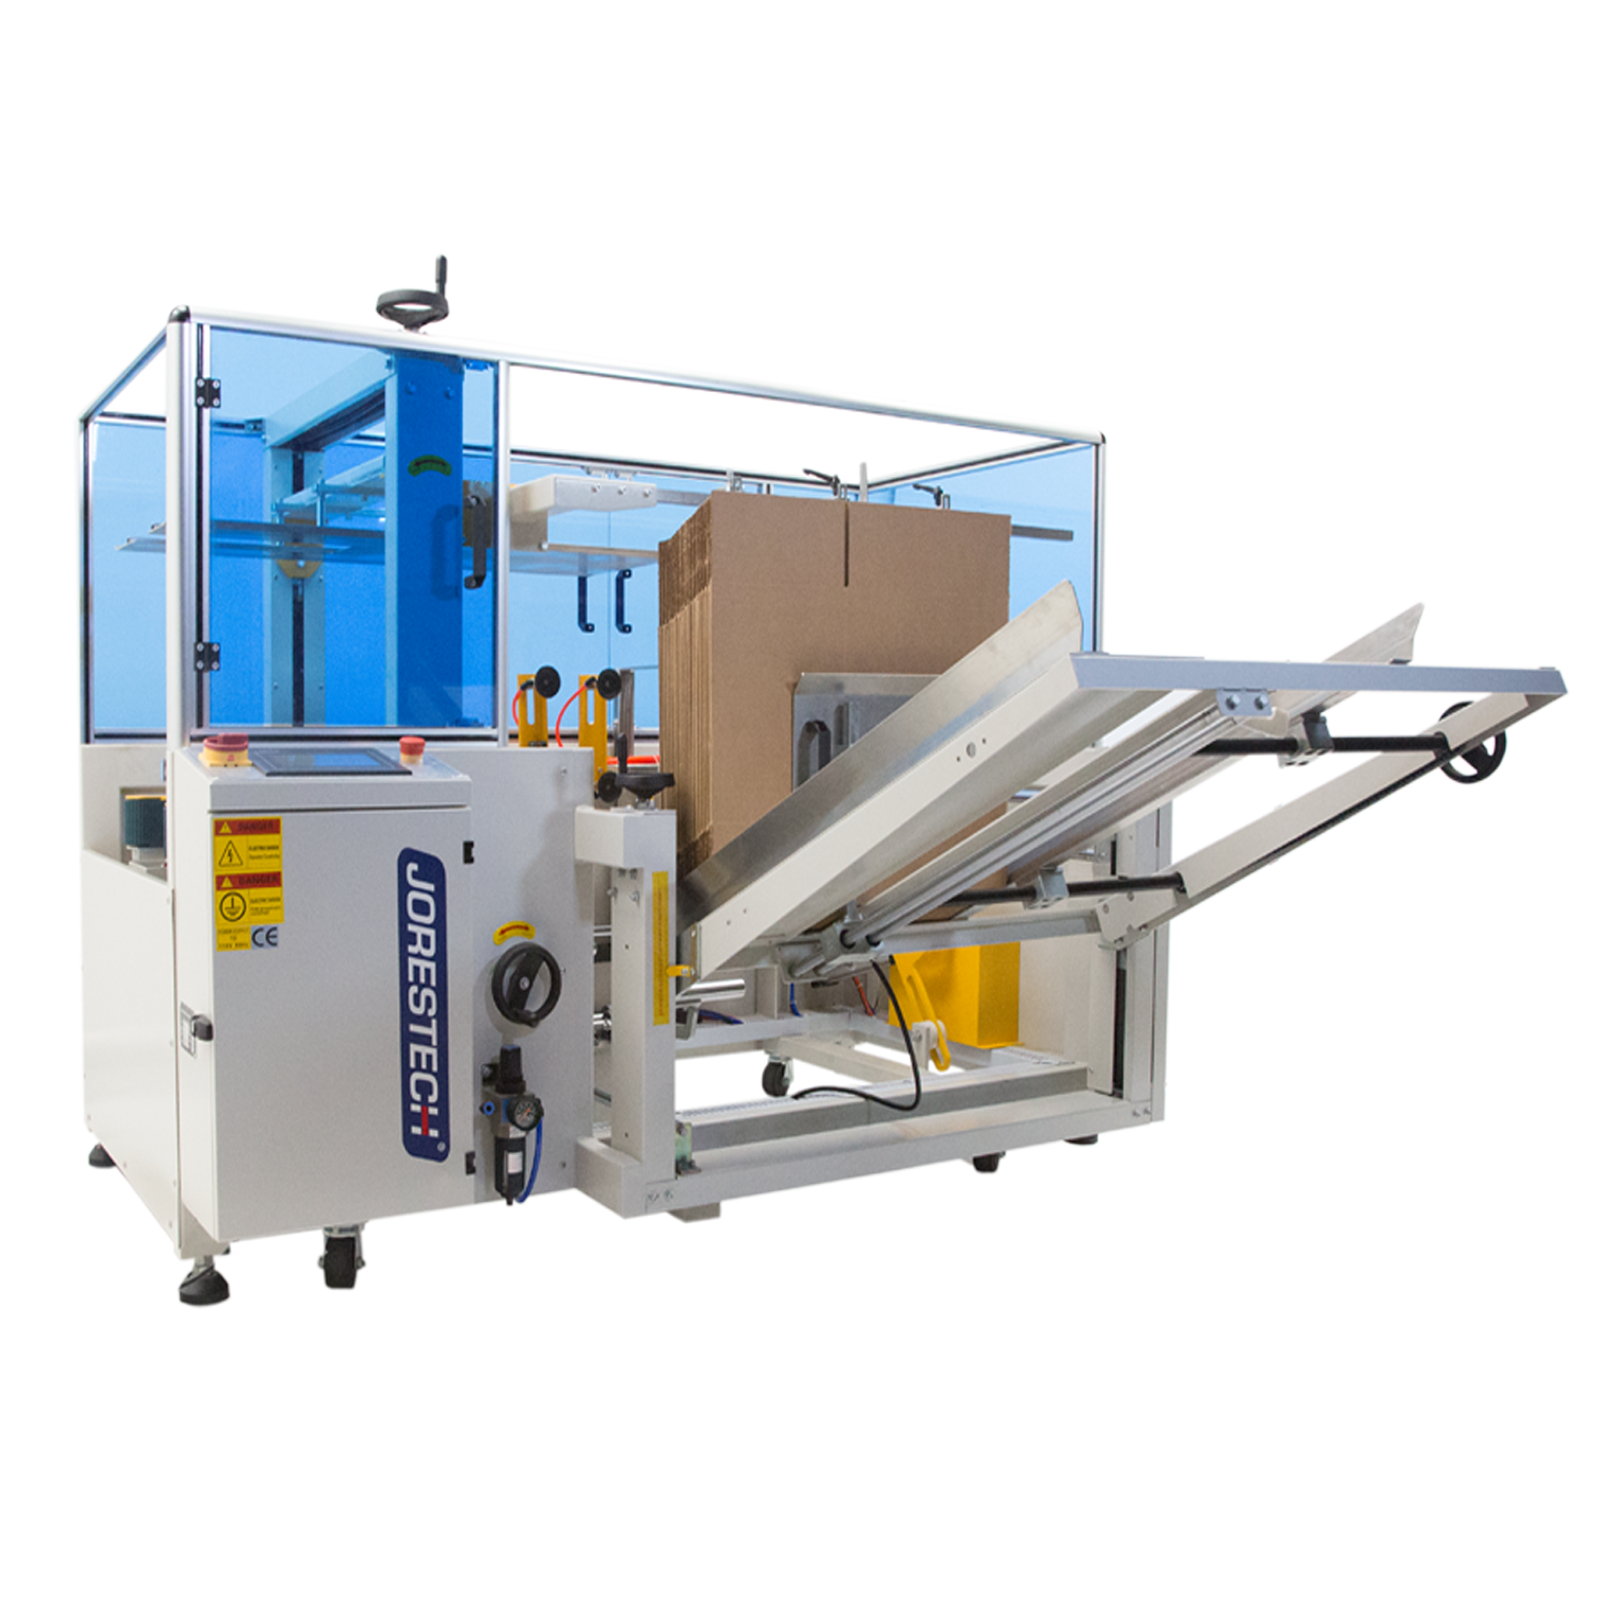 60 Single Face Corrugated Cardboard Roll Dispenser / Cutter with Casters